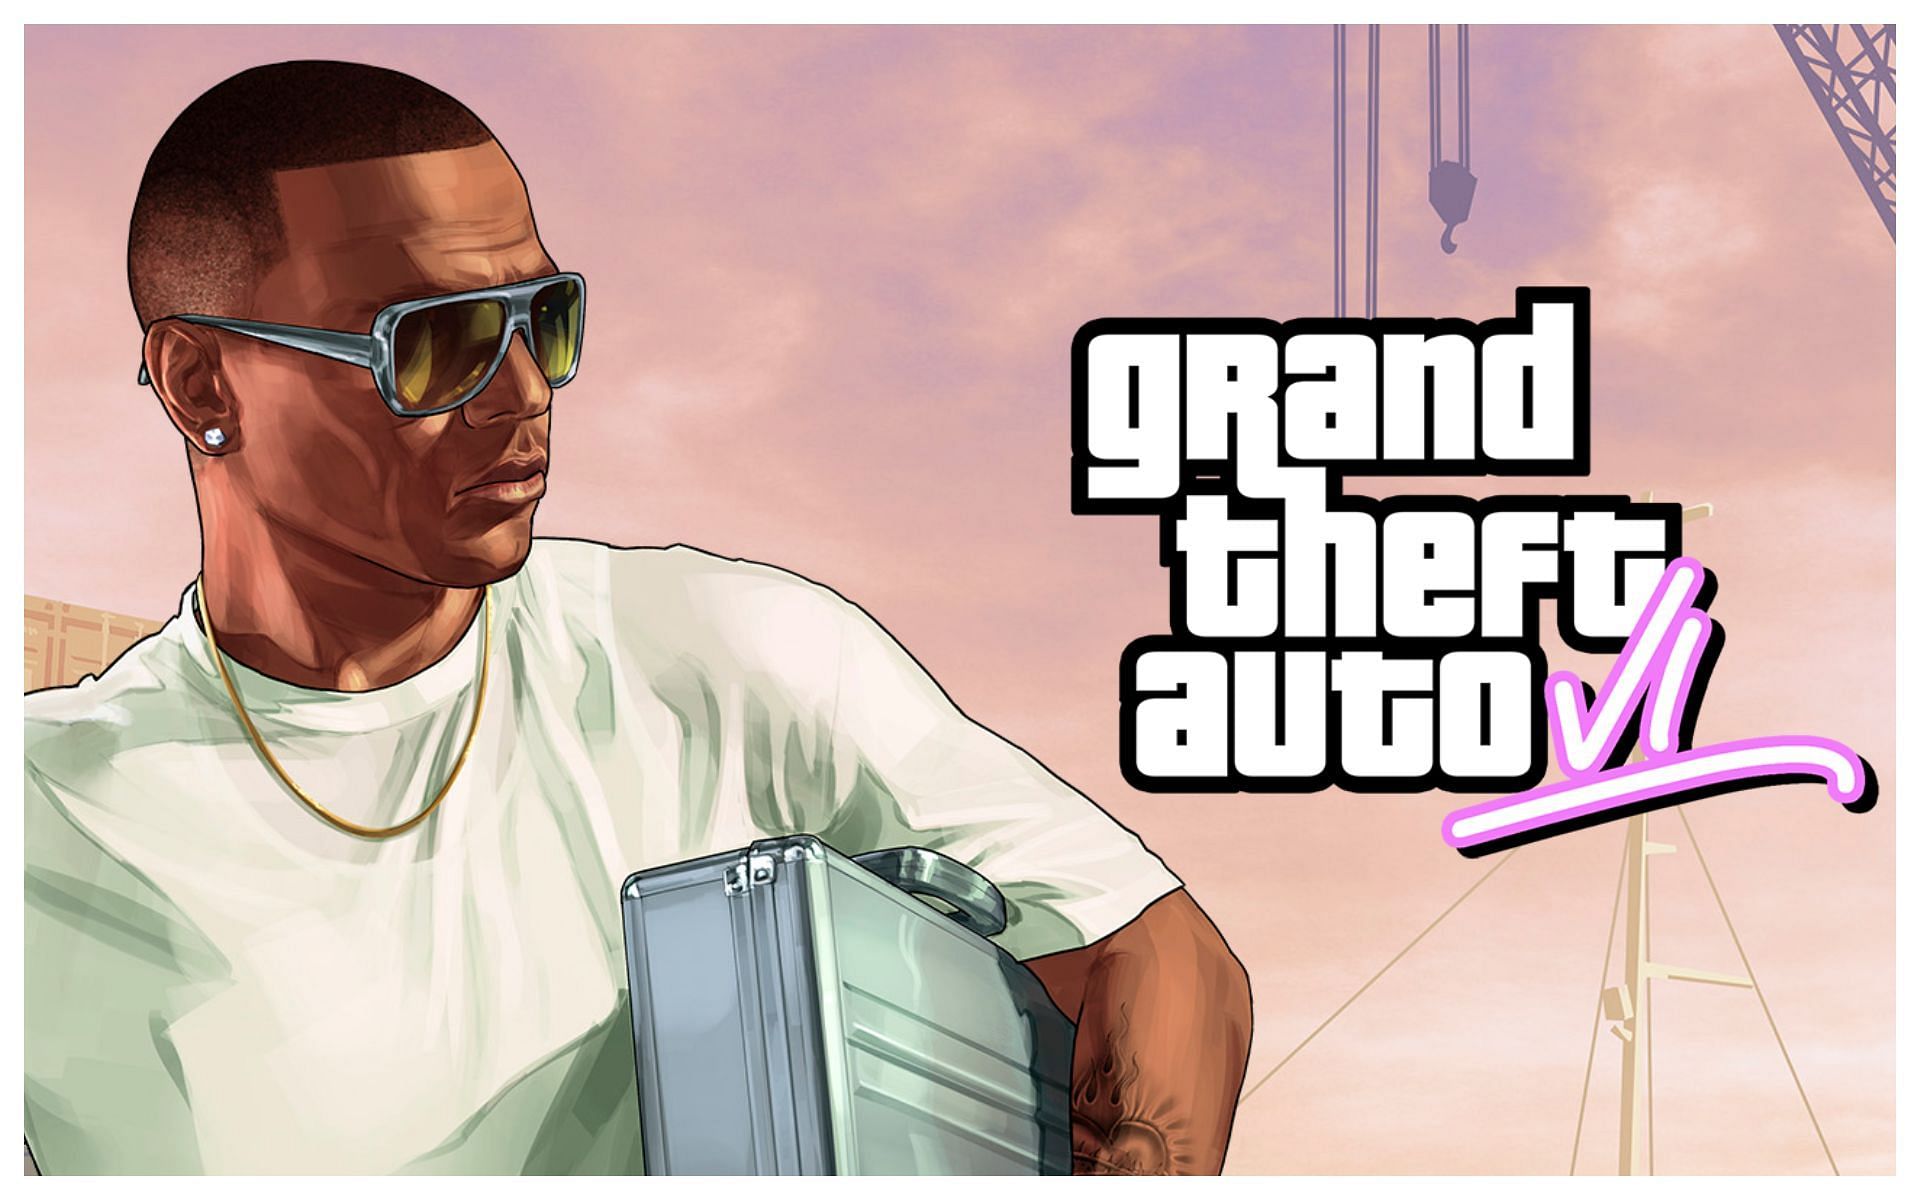 More info about GTA 6 was revealed in a recent report (Images via Sportskeeda)